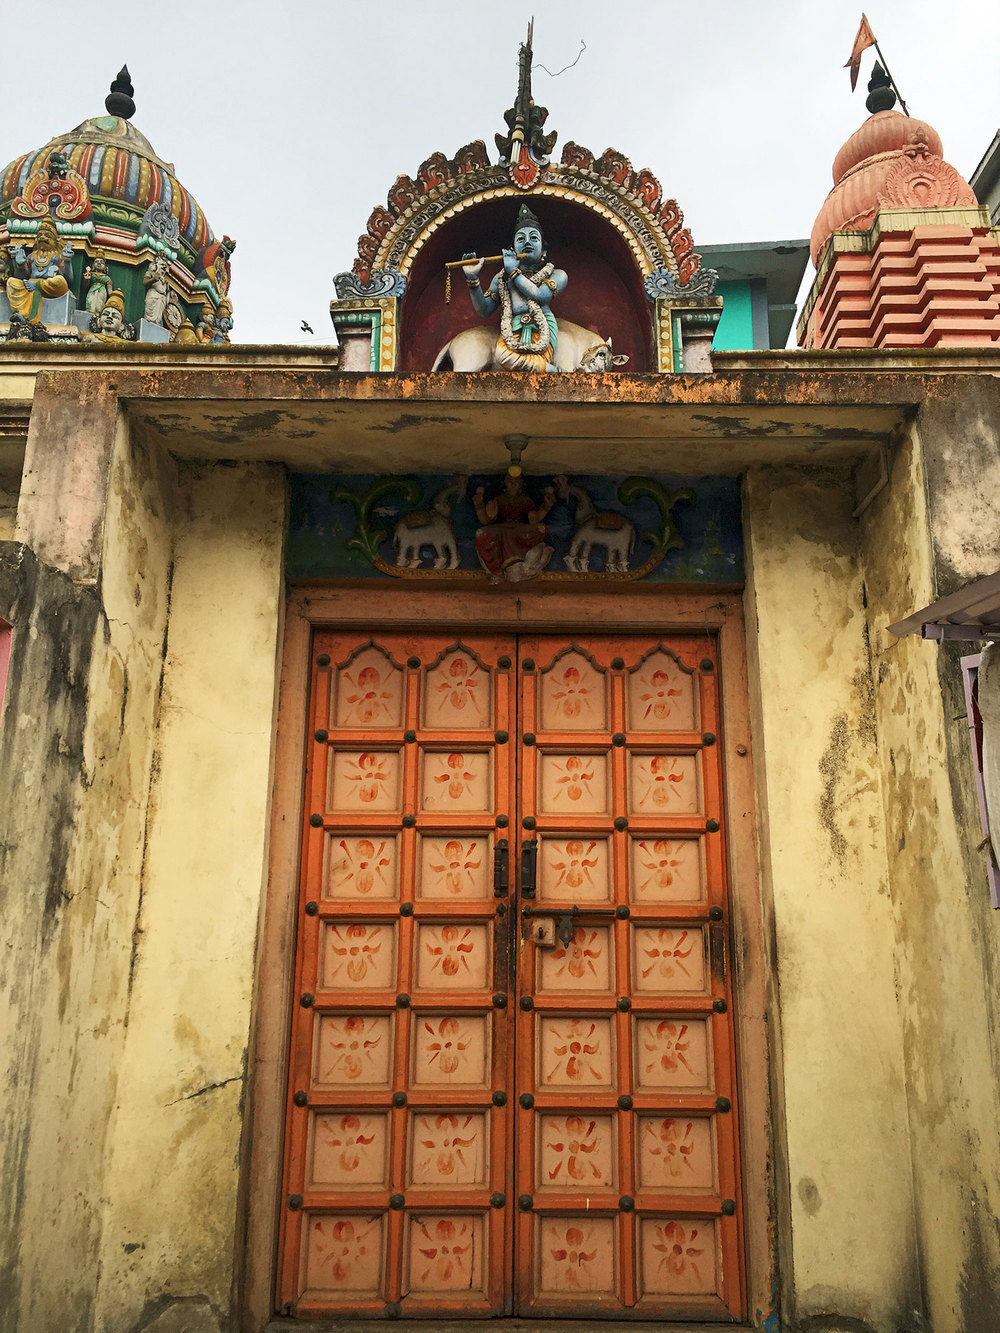 Entrance to a small Krishna temple in Ooty.